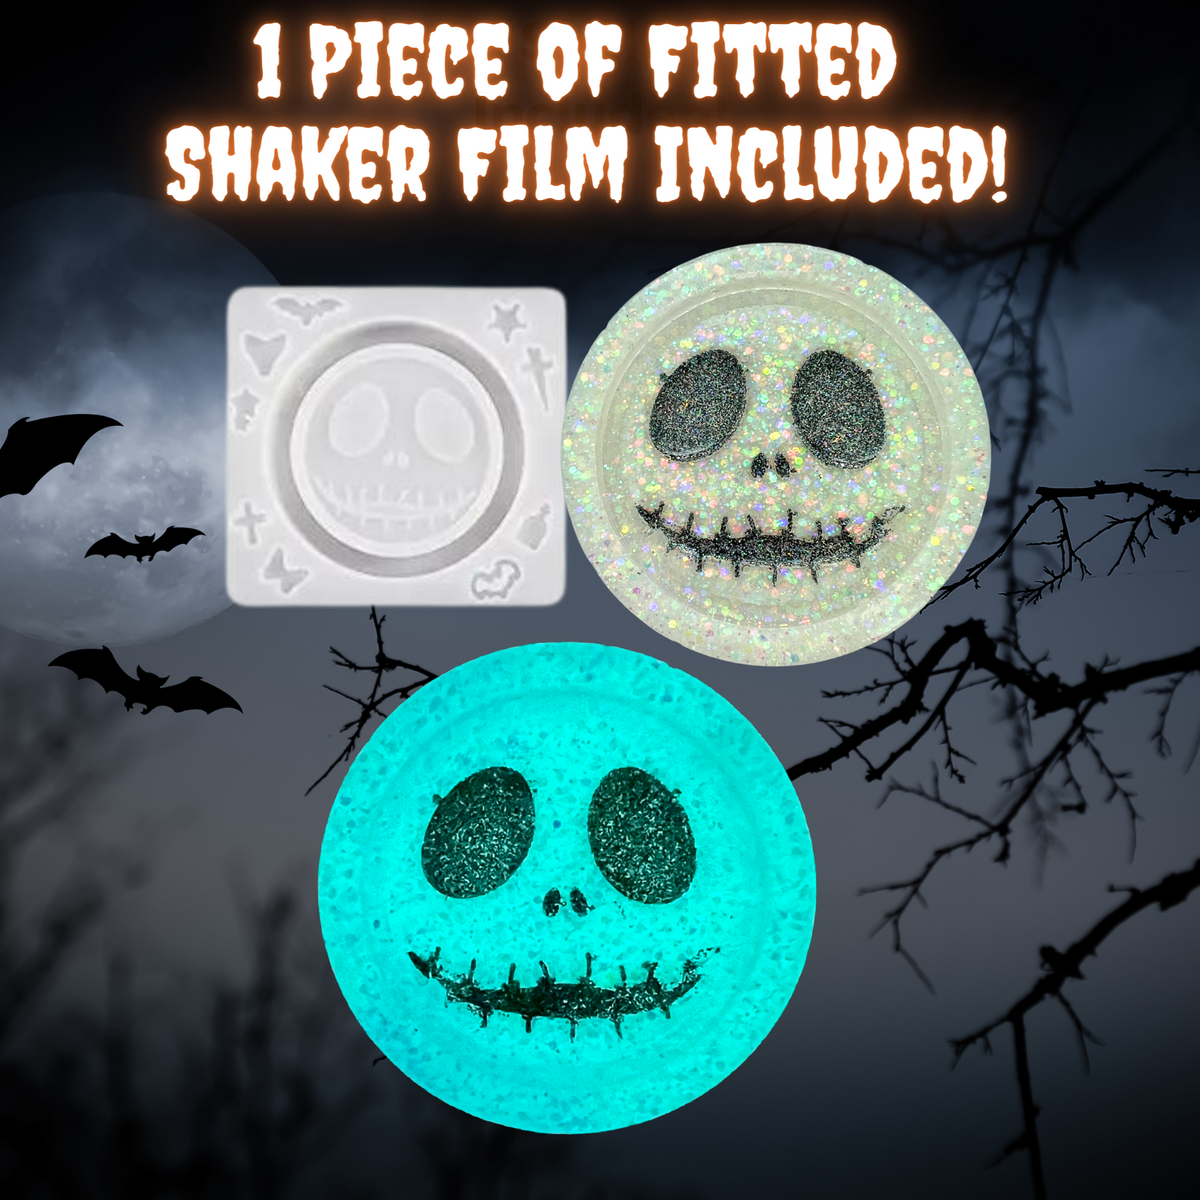 Jack-inspired Halloween Shaker Mold with Fitted Shaker Film for UV and Epoxy Resin Art